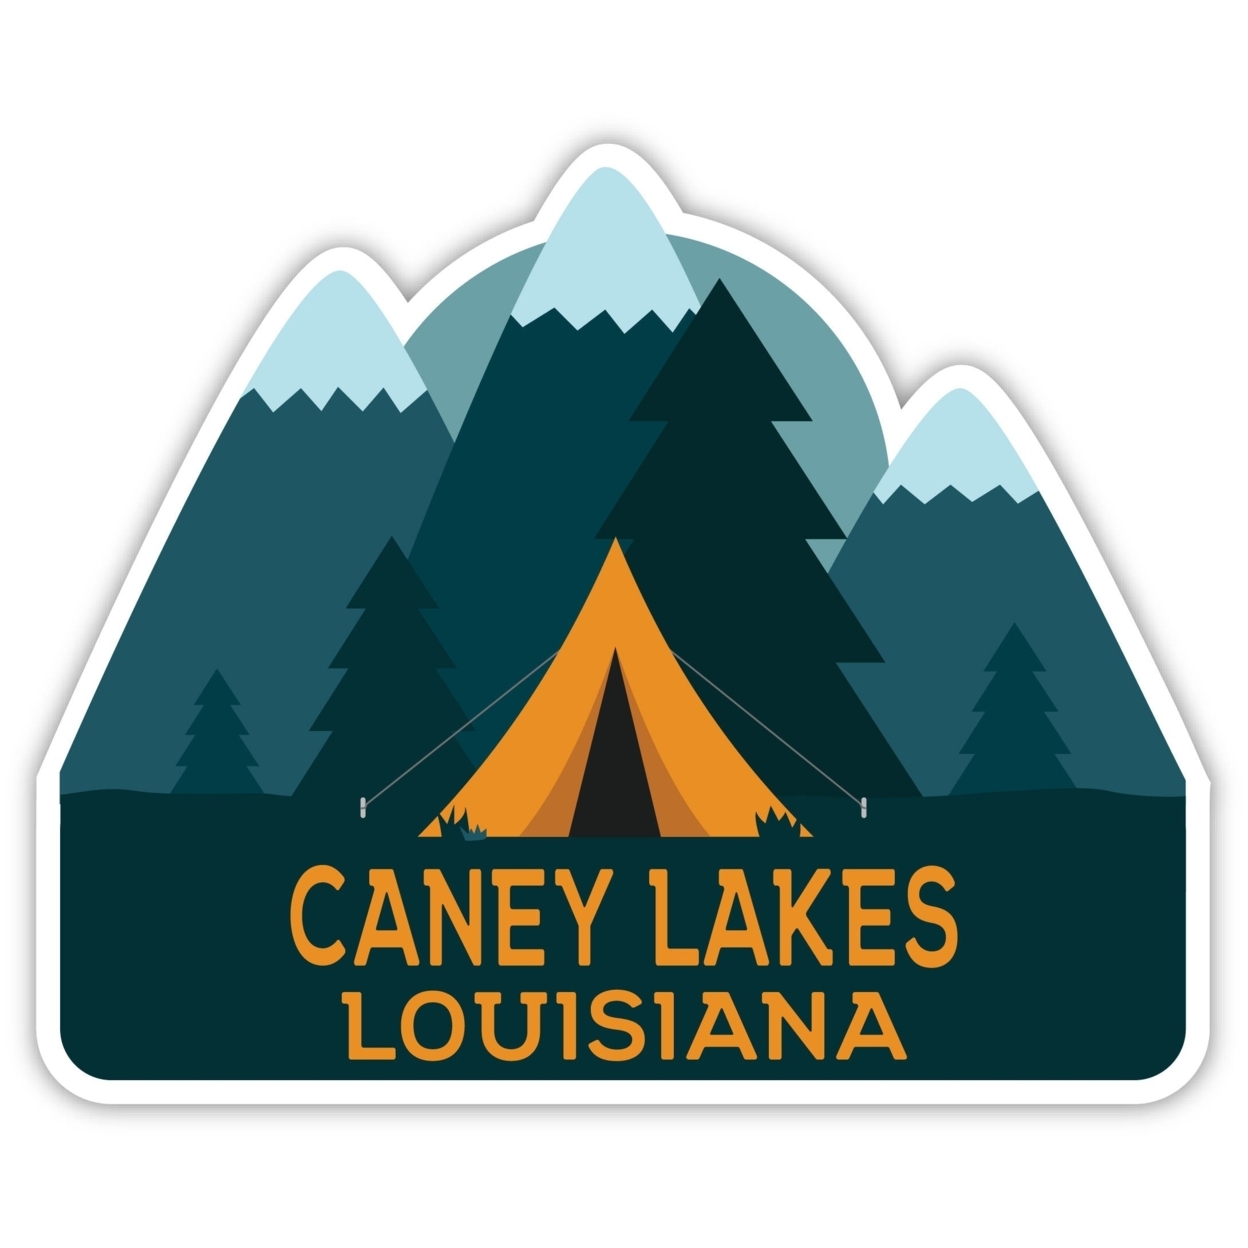 Caney Lakes Louisiana Souvenir Decorative Stickers (Choose Theme And Size) - 4-Pack, 6-Inch, Tent